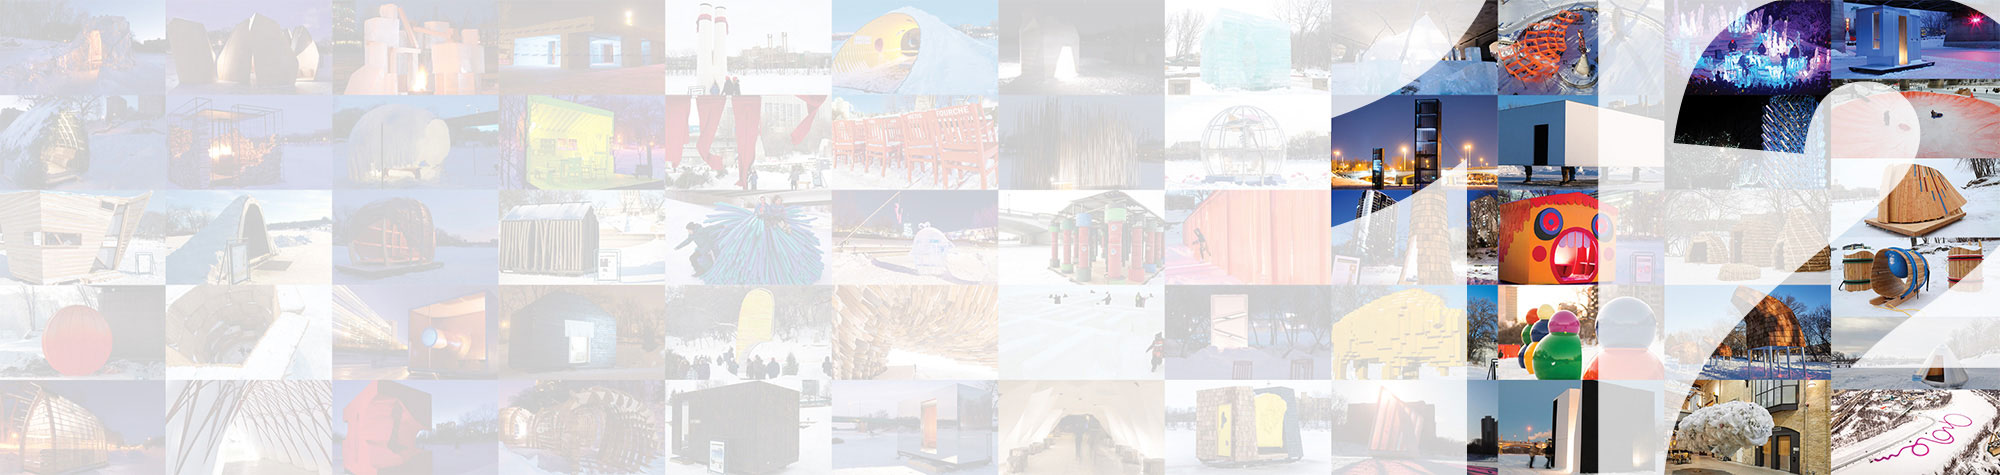 an arts + architecture competition on ice - WARMING HUTS v.2022